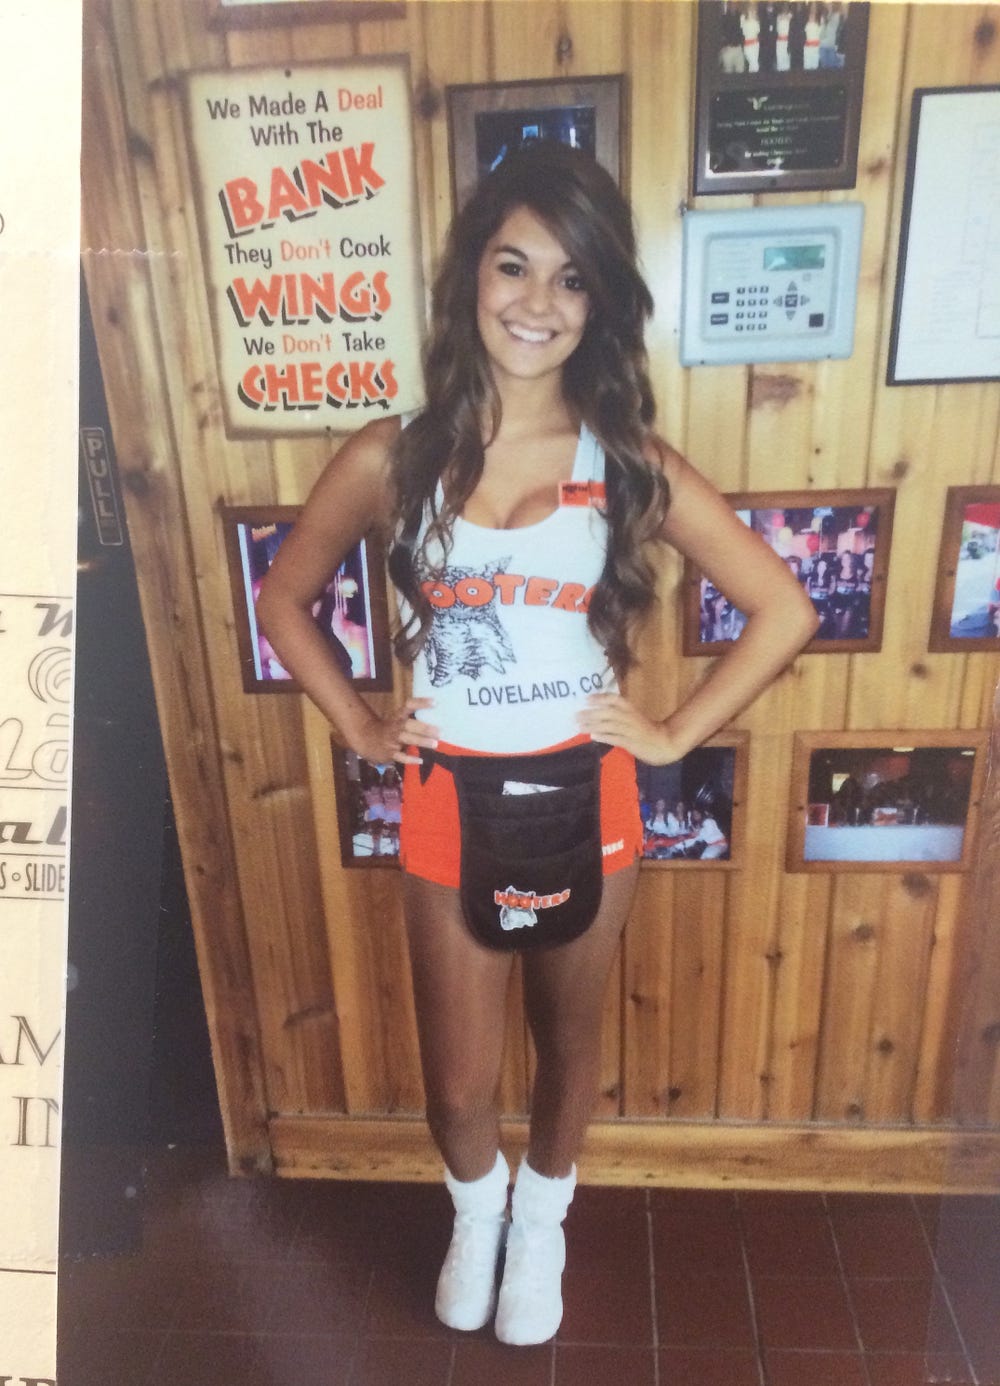 hooters waitress outfit